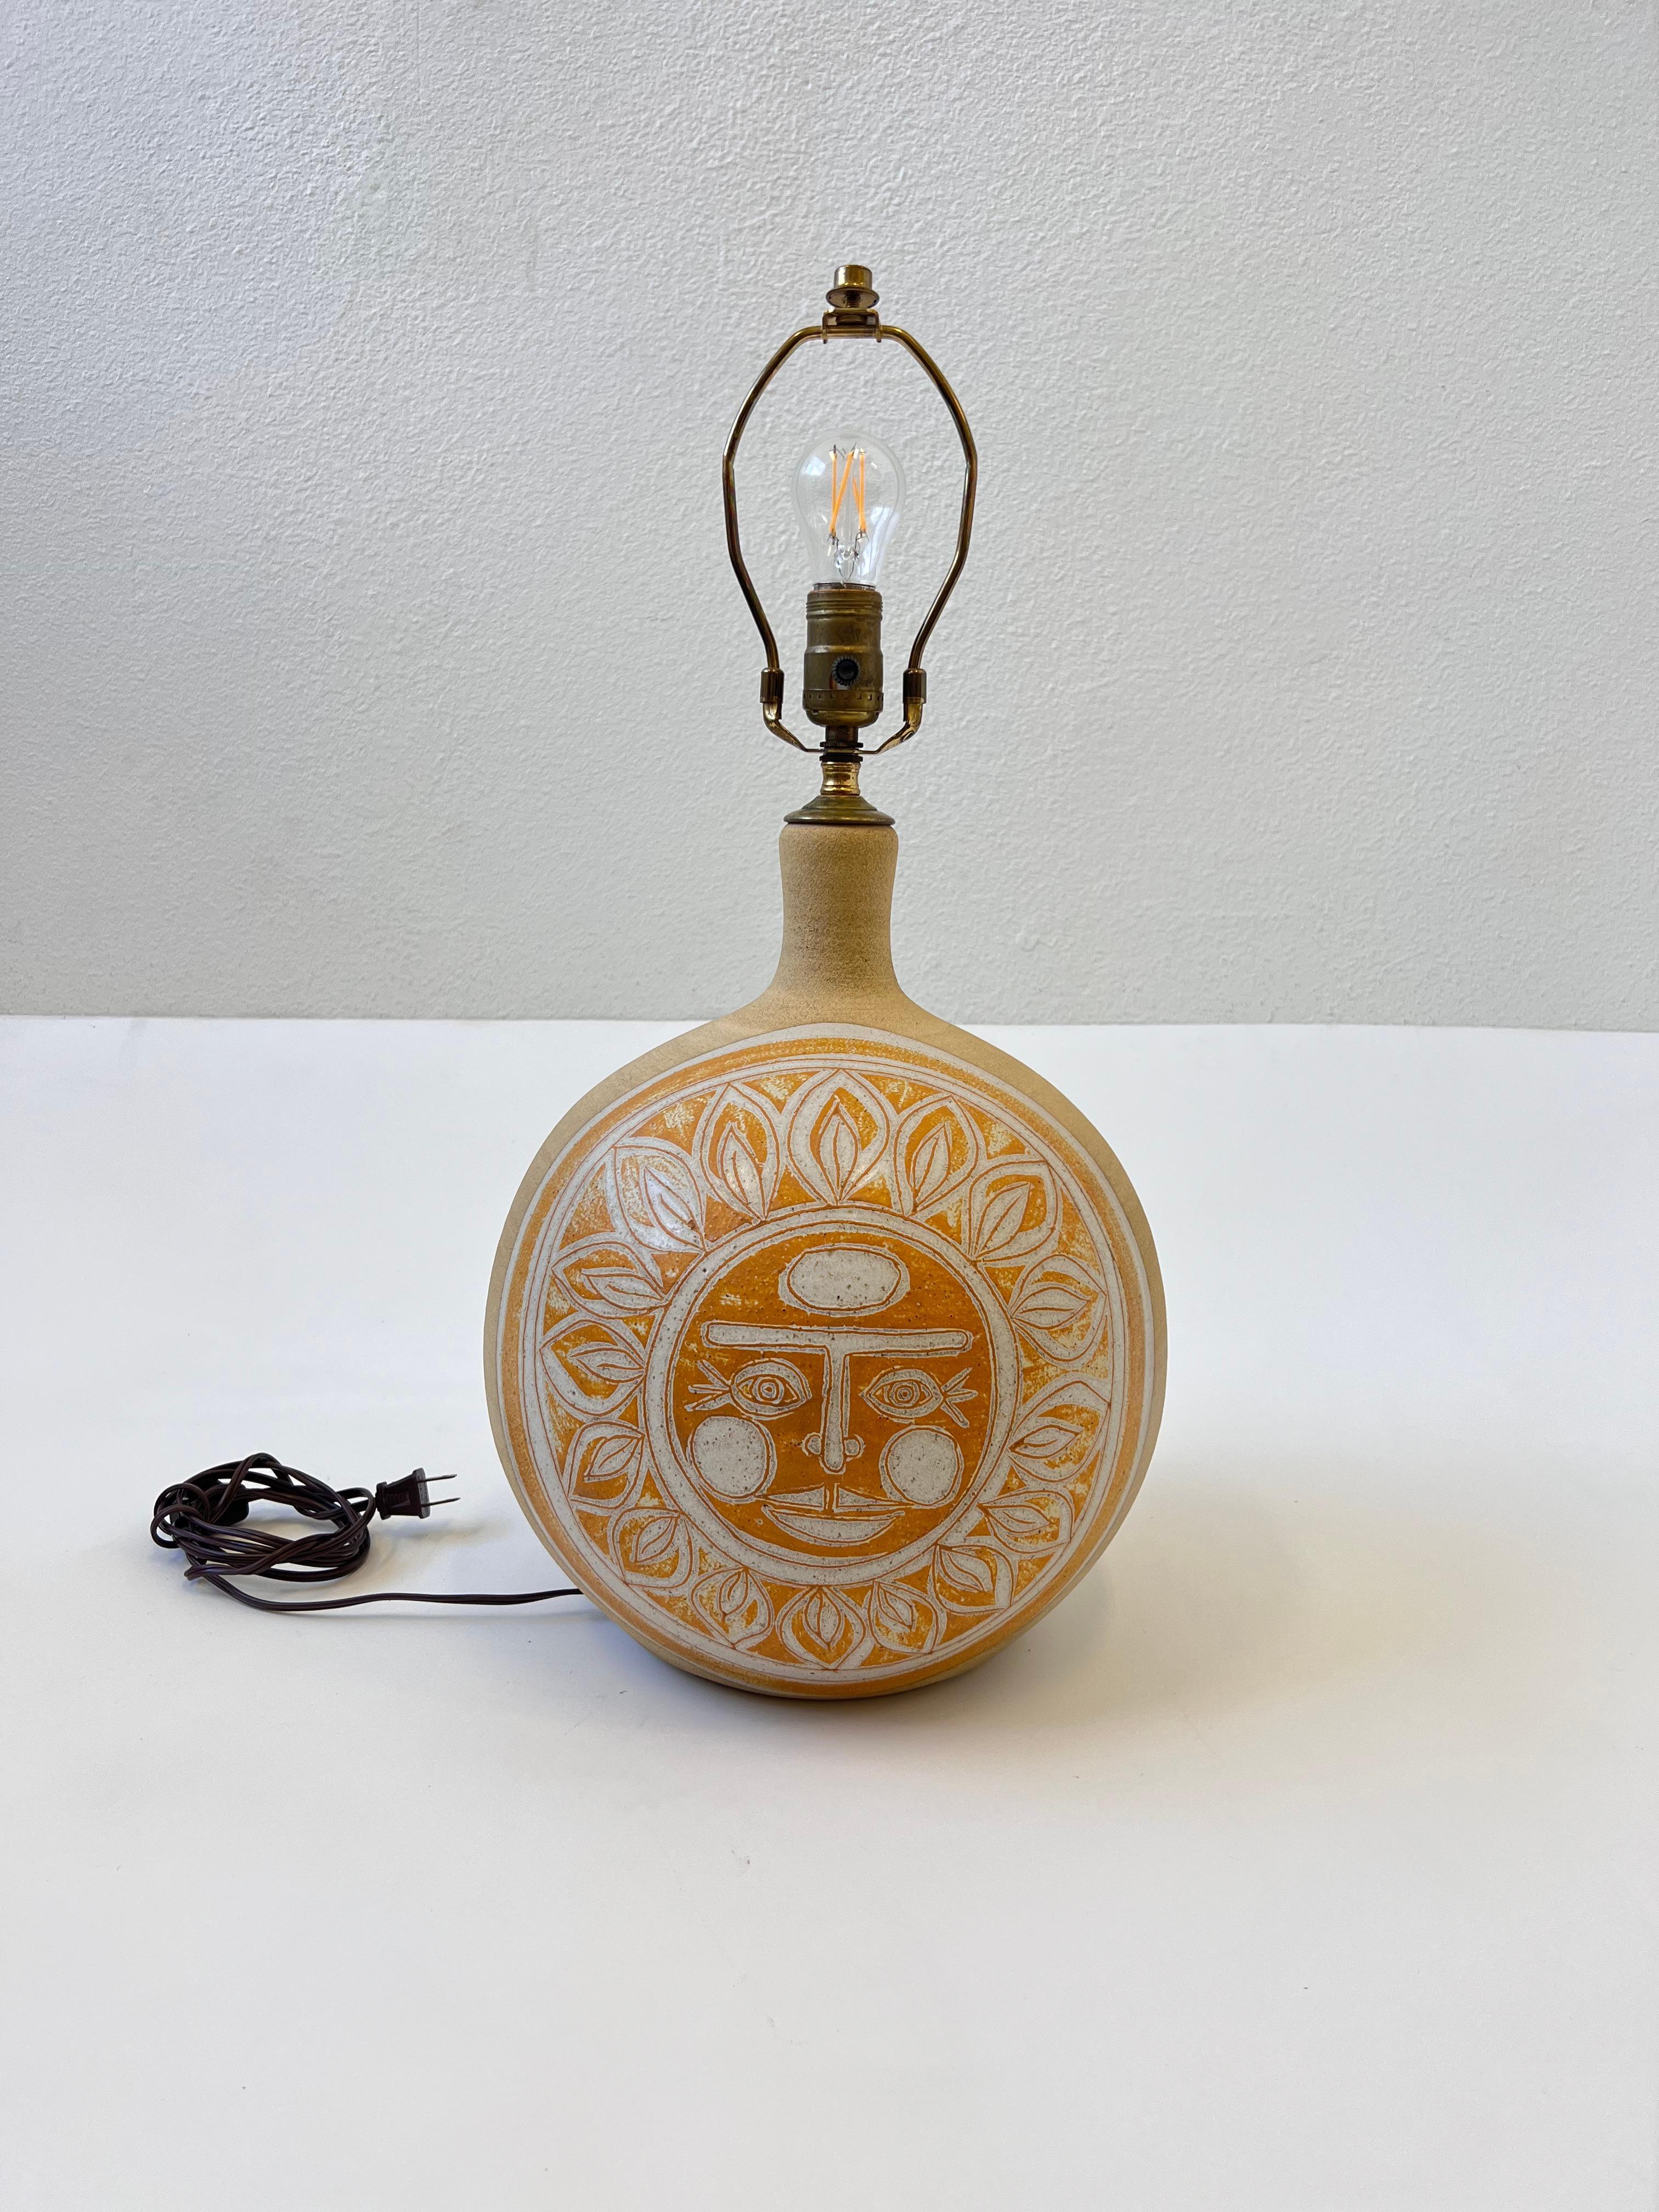 Studio ceramic table lamp with two sun faces from 1977 by Brown. 
Newly rewired with new wire and socket. The brass has an aged finish and shade is vanilla color linen. 
It takes one 75w Max Edison light bulb. 

Measurements: 24.5” High, 20”